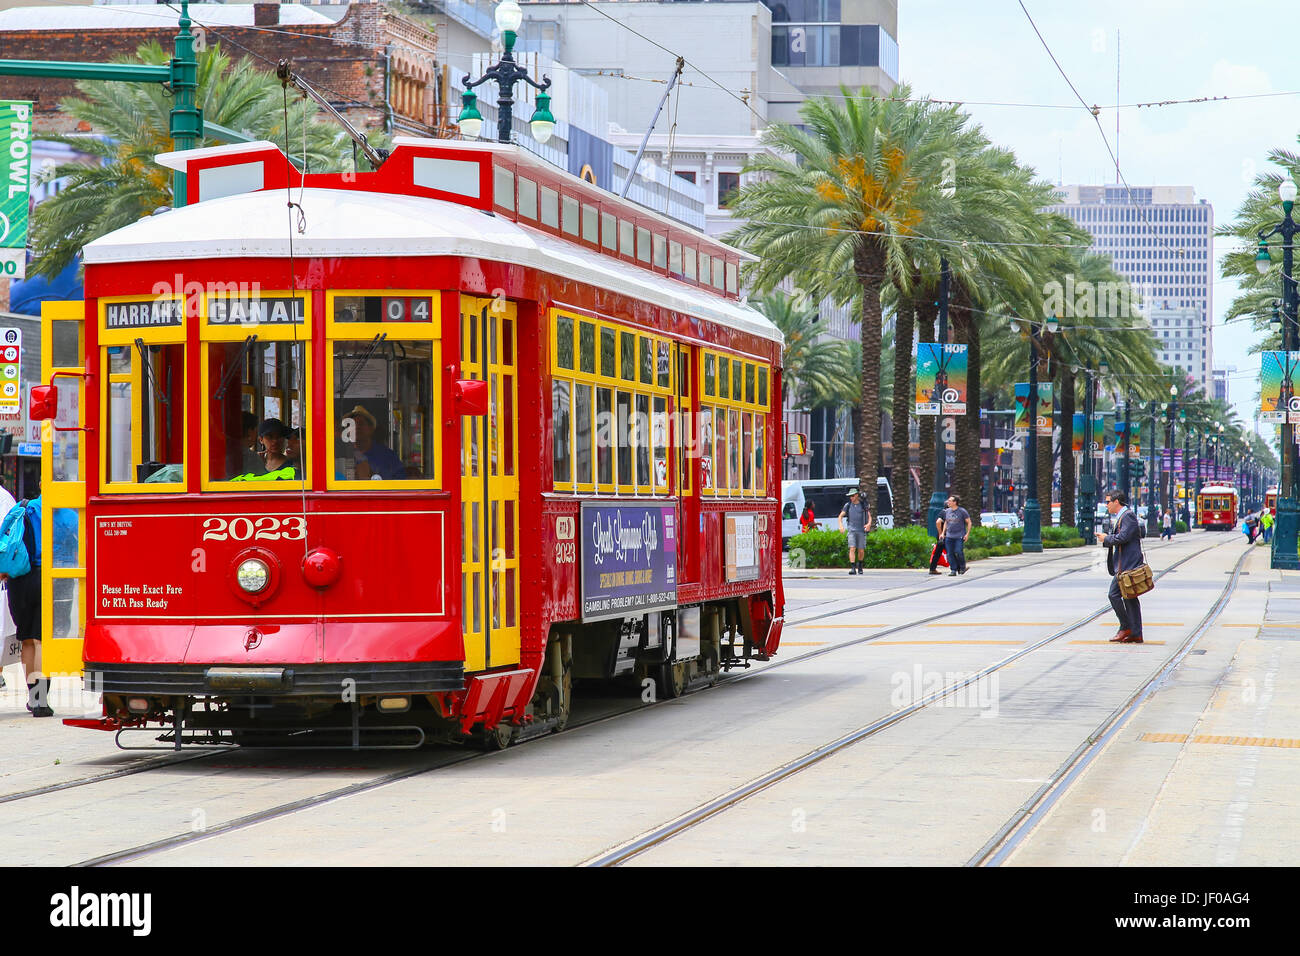 New Orleans Streetcar in Monochrome Stock Photo